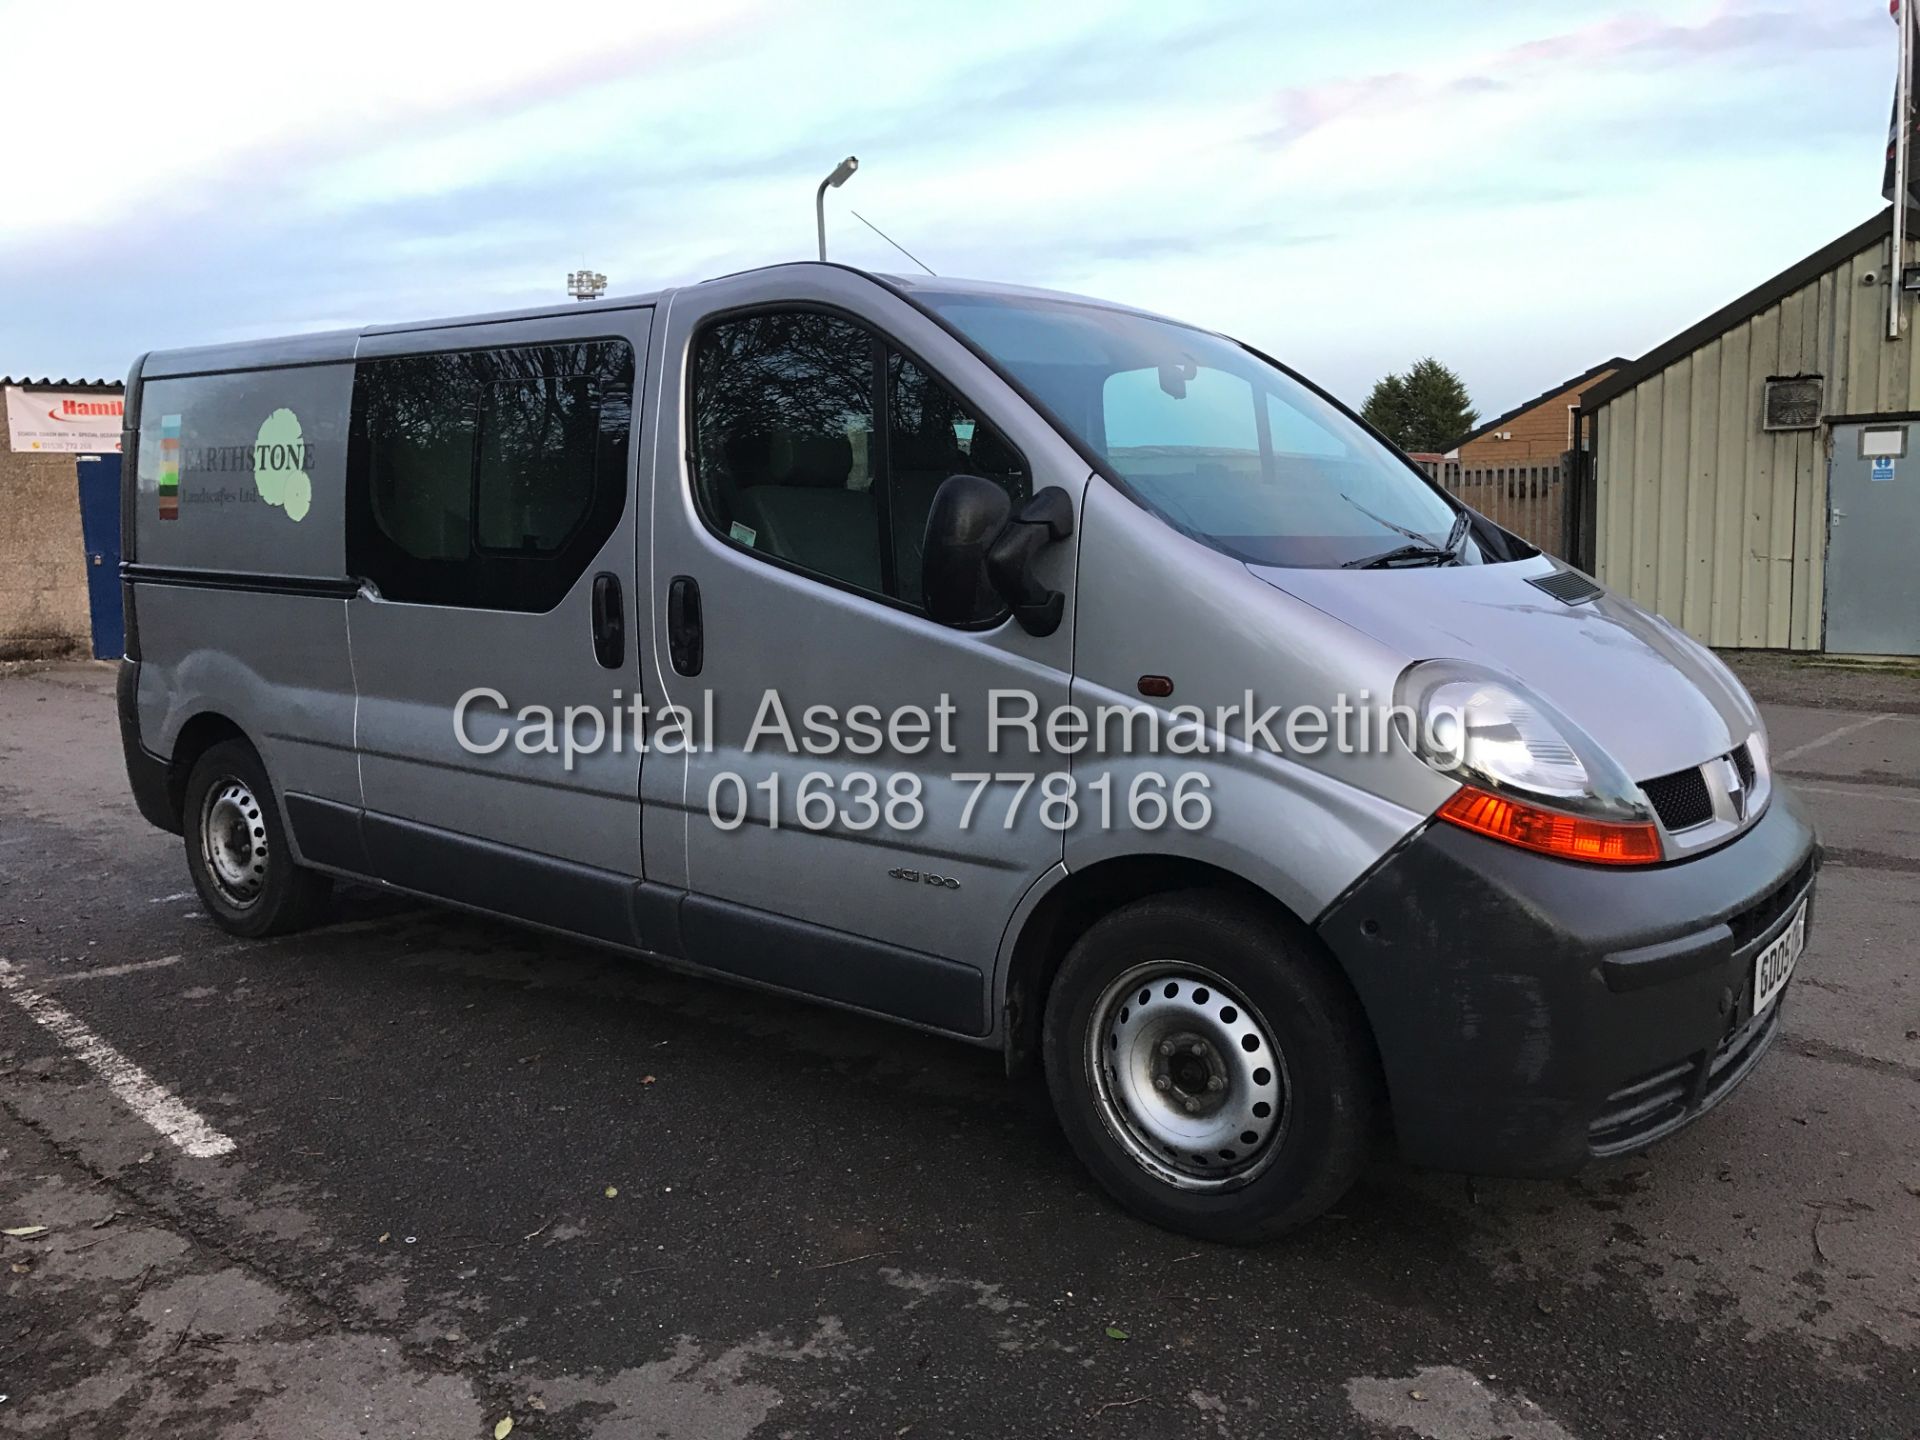 On Sale RENAULT TRAFIC 1.9DCI LONG WHEEL BASE DUELINER 6 SEATER - 05 REG - SILVER - AIR CON - WOW!!! - Image 7 of 19